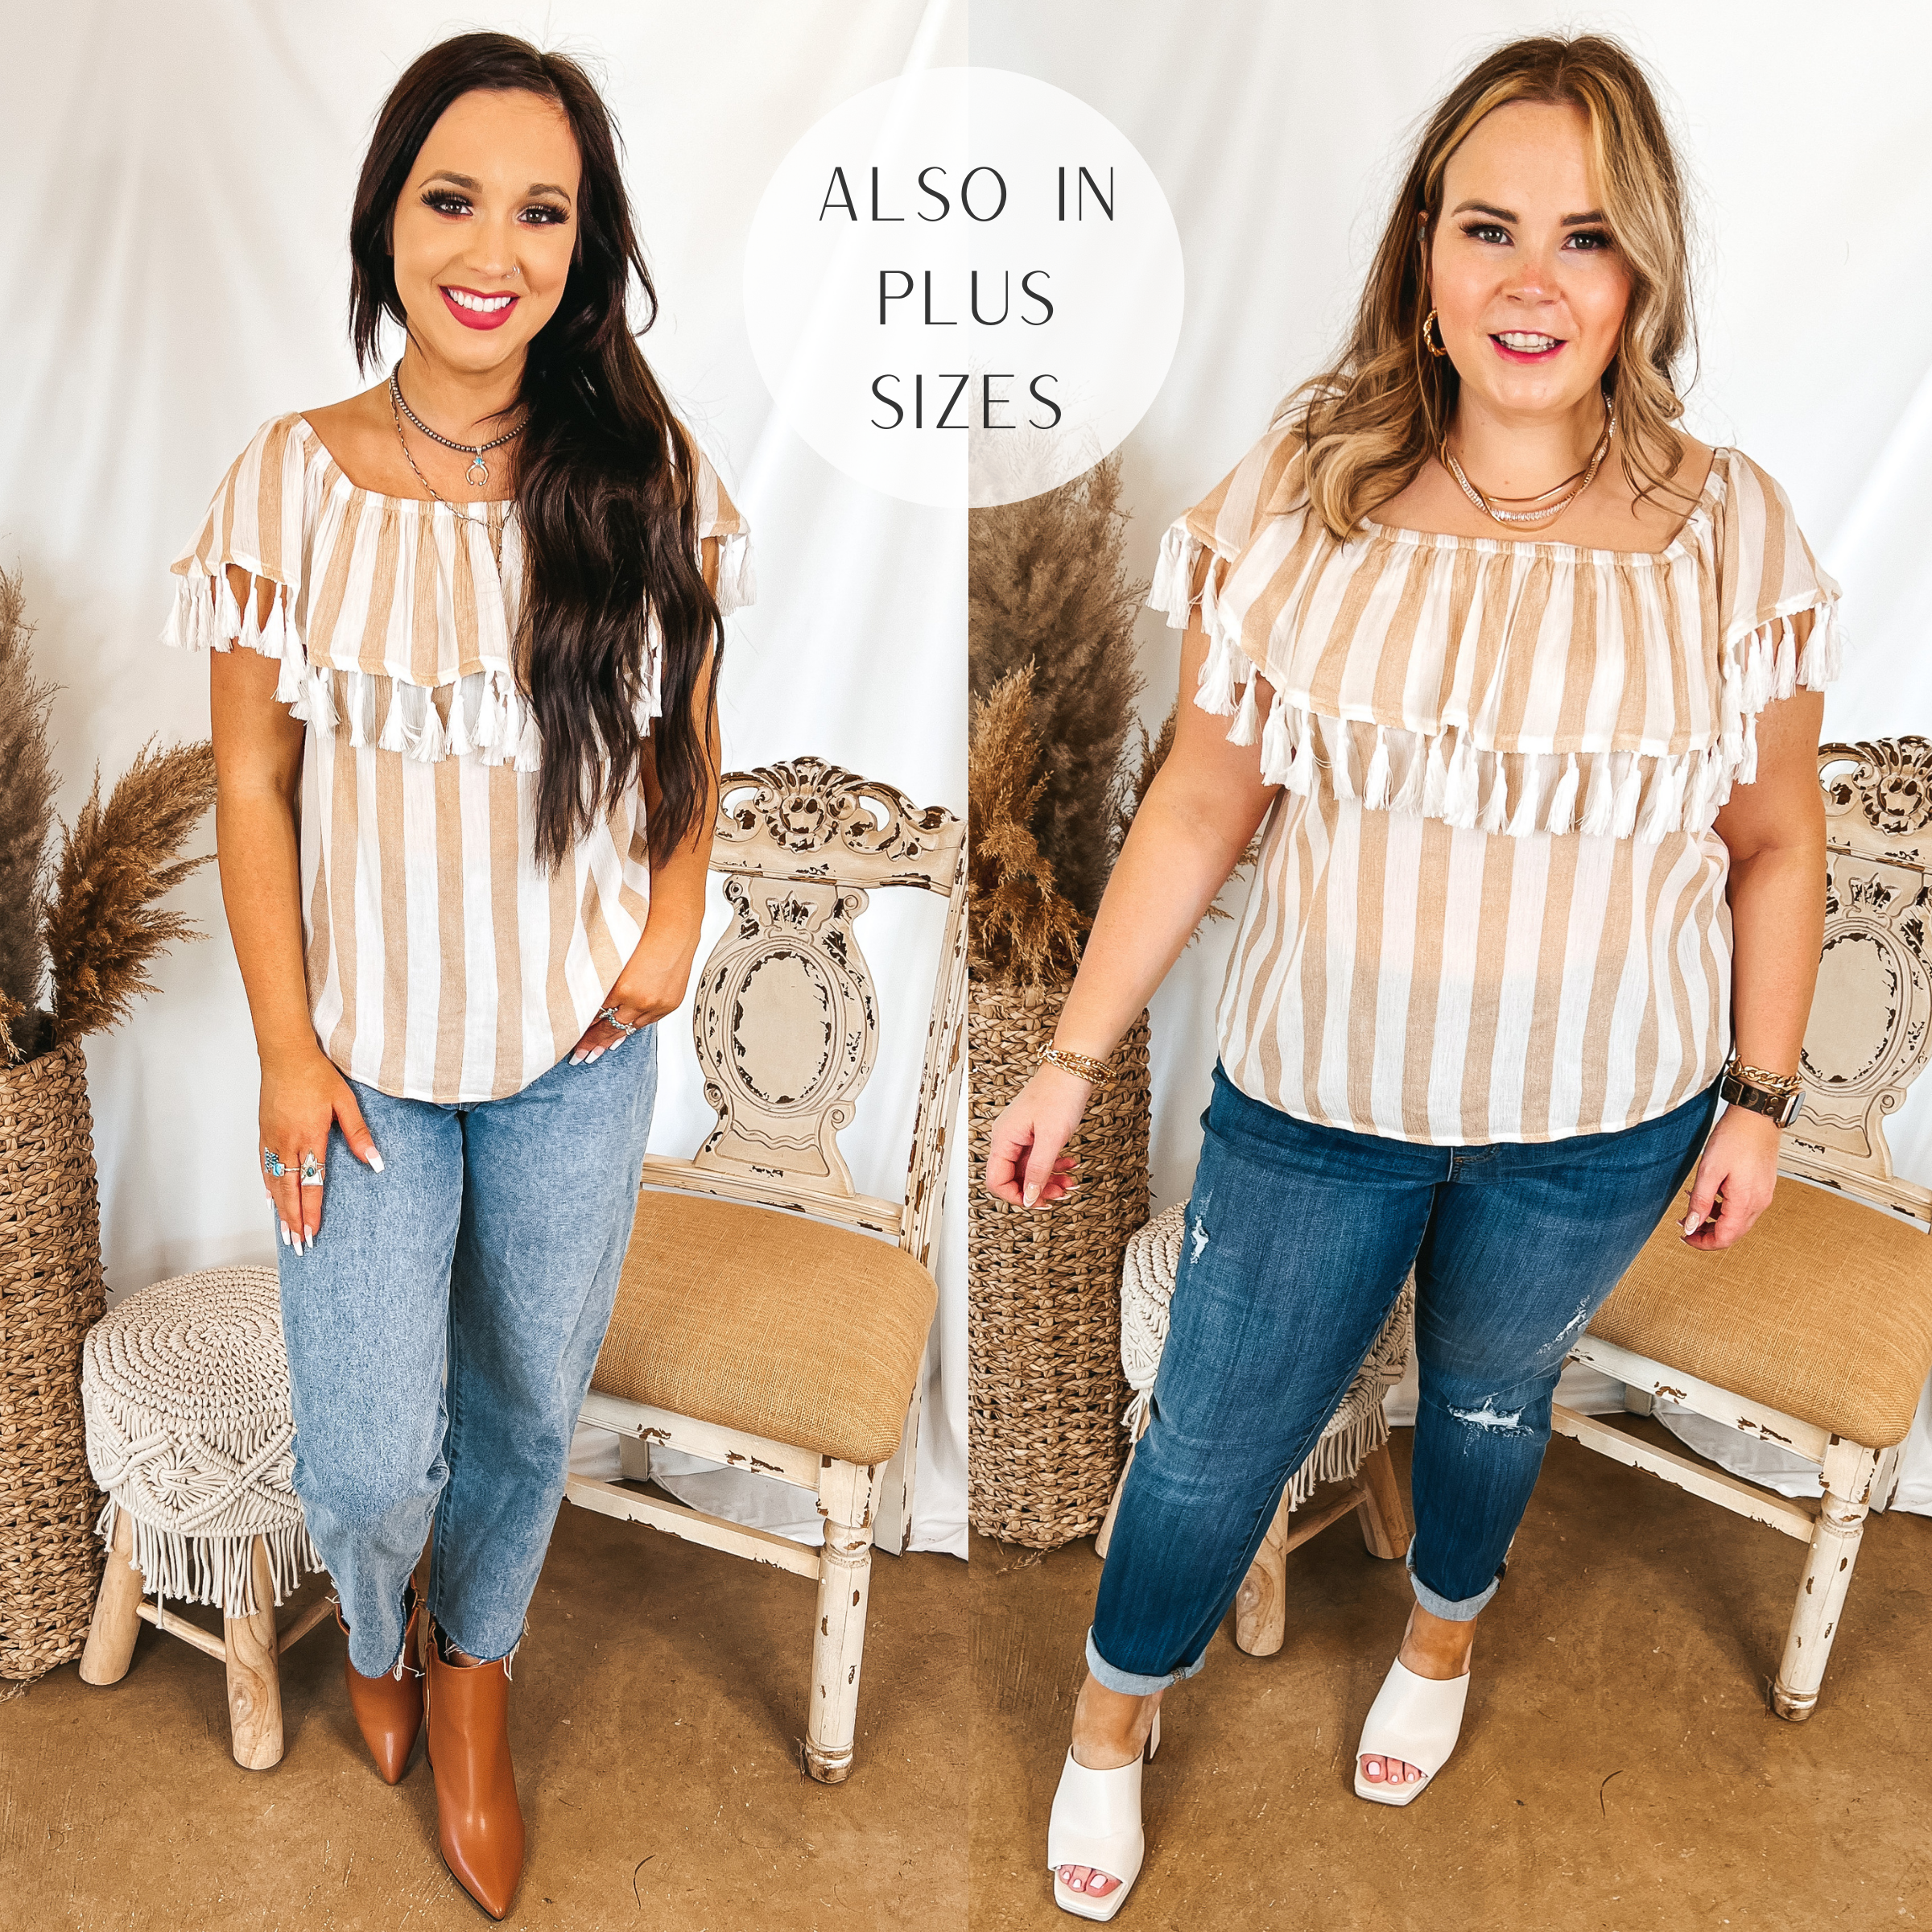 Models are wearing a striped off the shoulder top with tassels. Size small model has it paired with light wash mom jeans, tan booties, and silver jewelry. Size large model has it paired with white heels, jeggings, and gold jewelry.